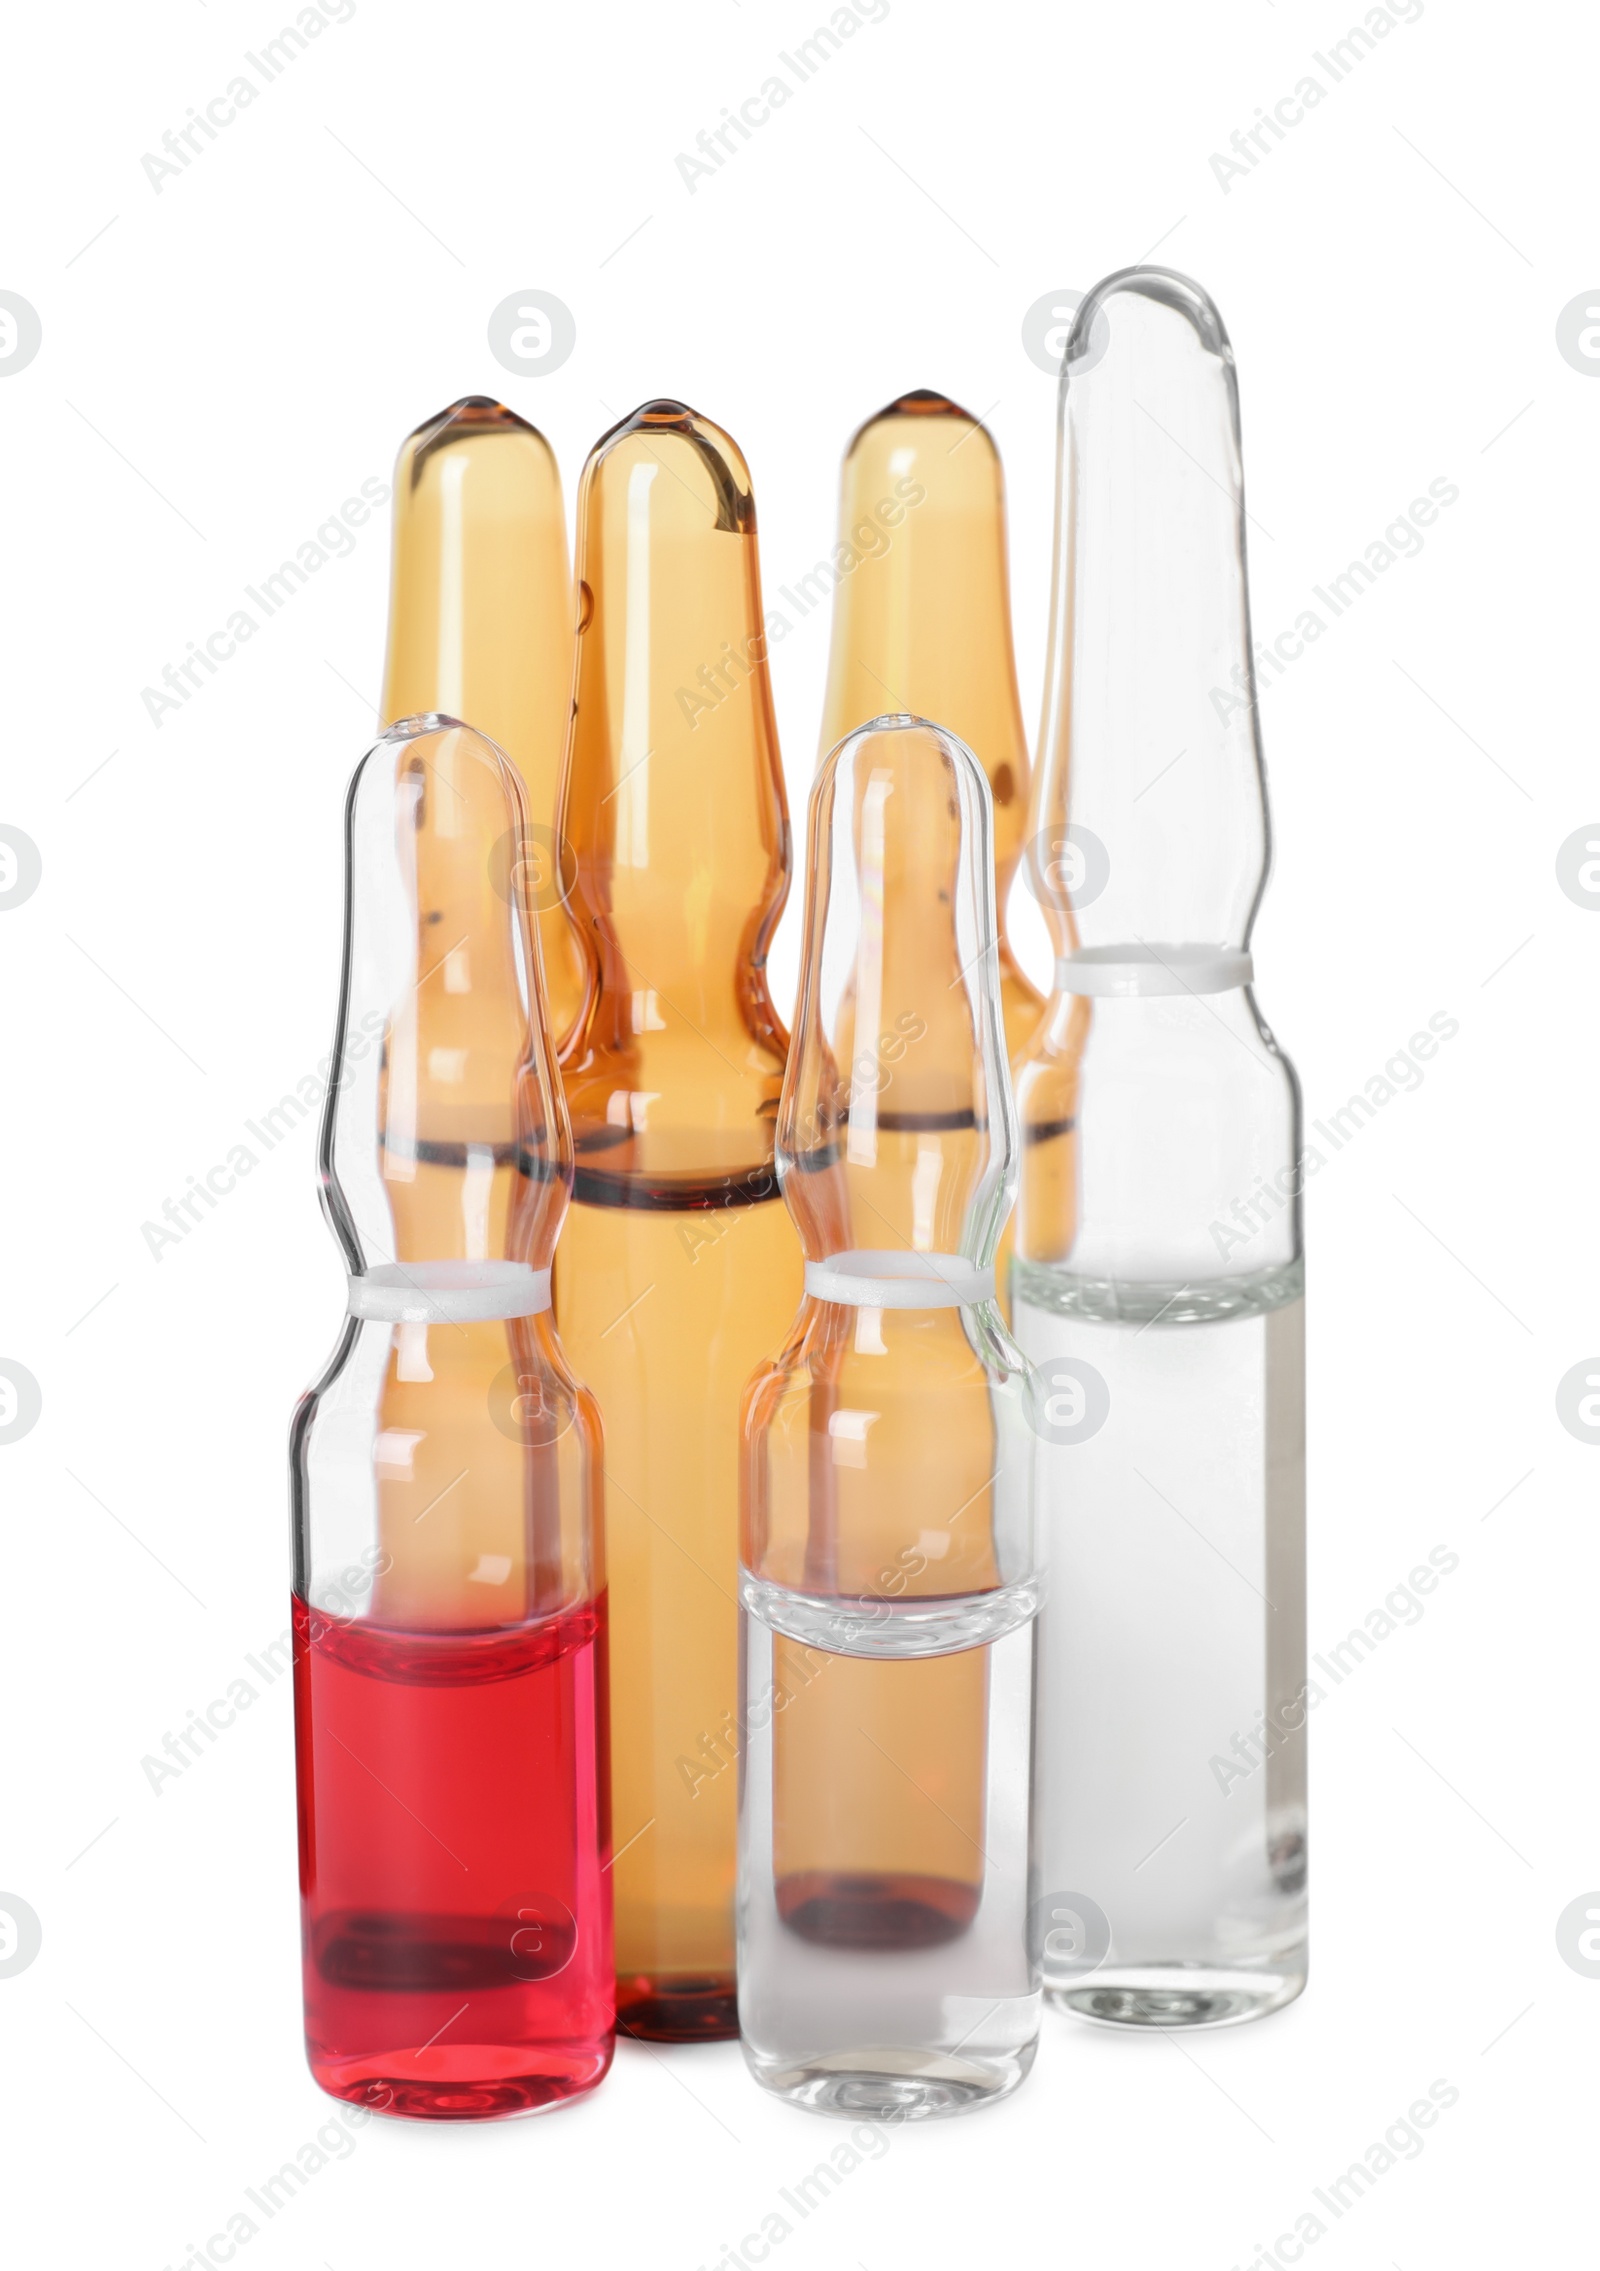 Photo of Different ampoules with pharmaceutical products on white background